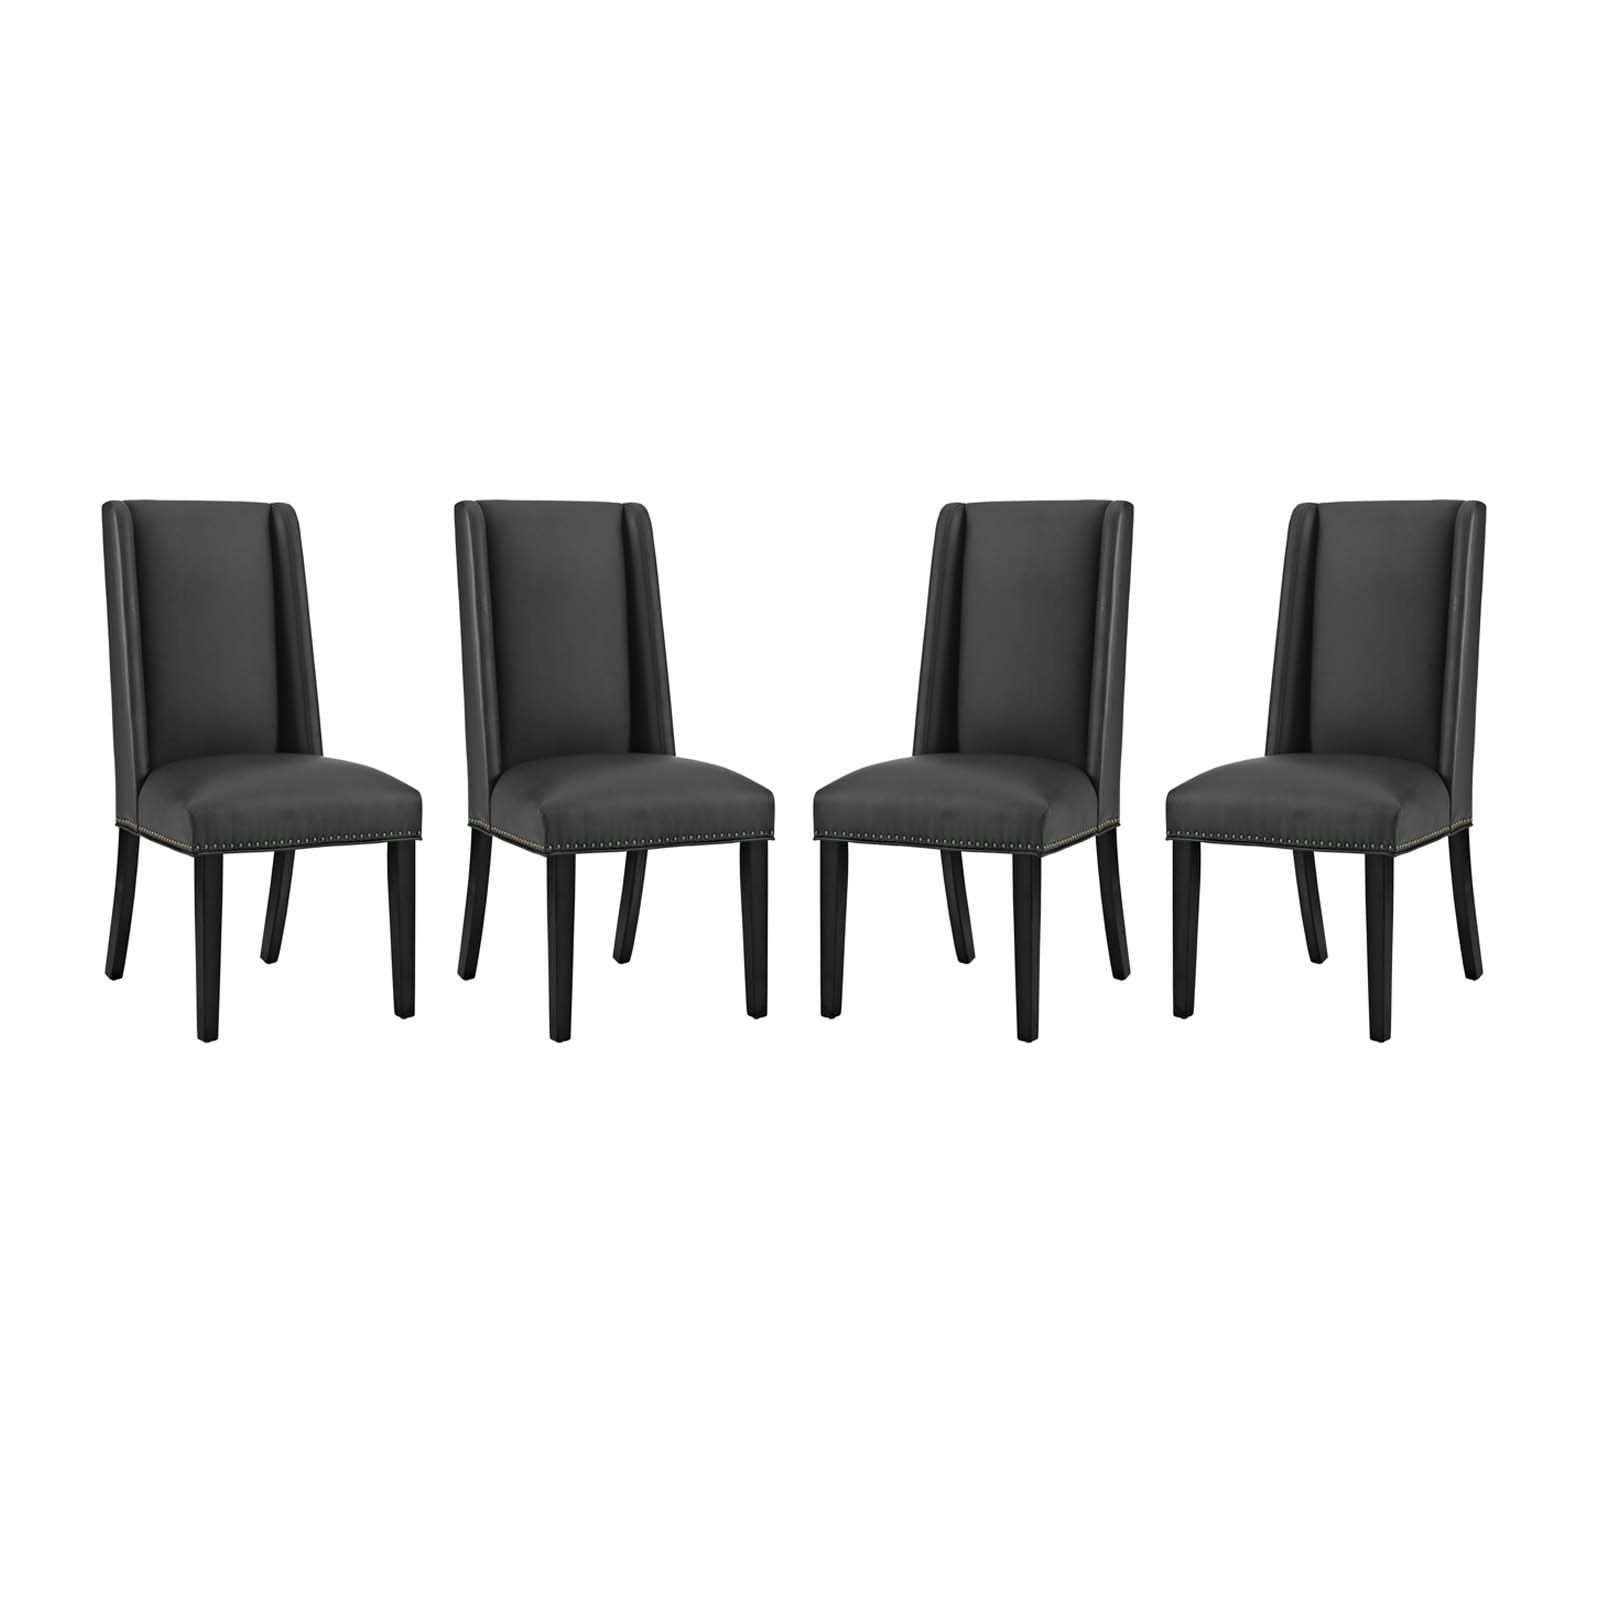 Luxurious Black Faux Leather Upholstered Side Chair